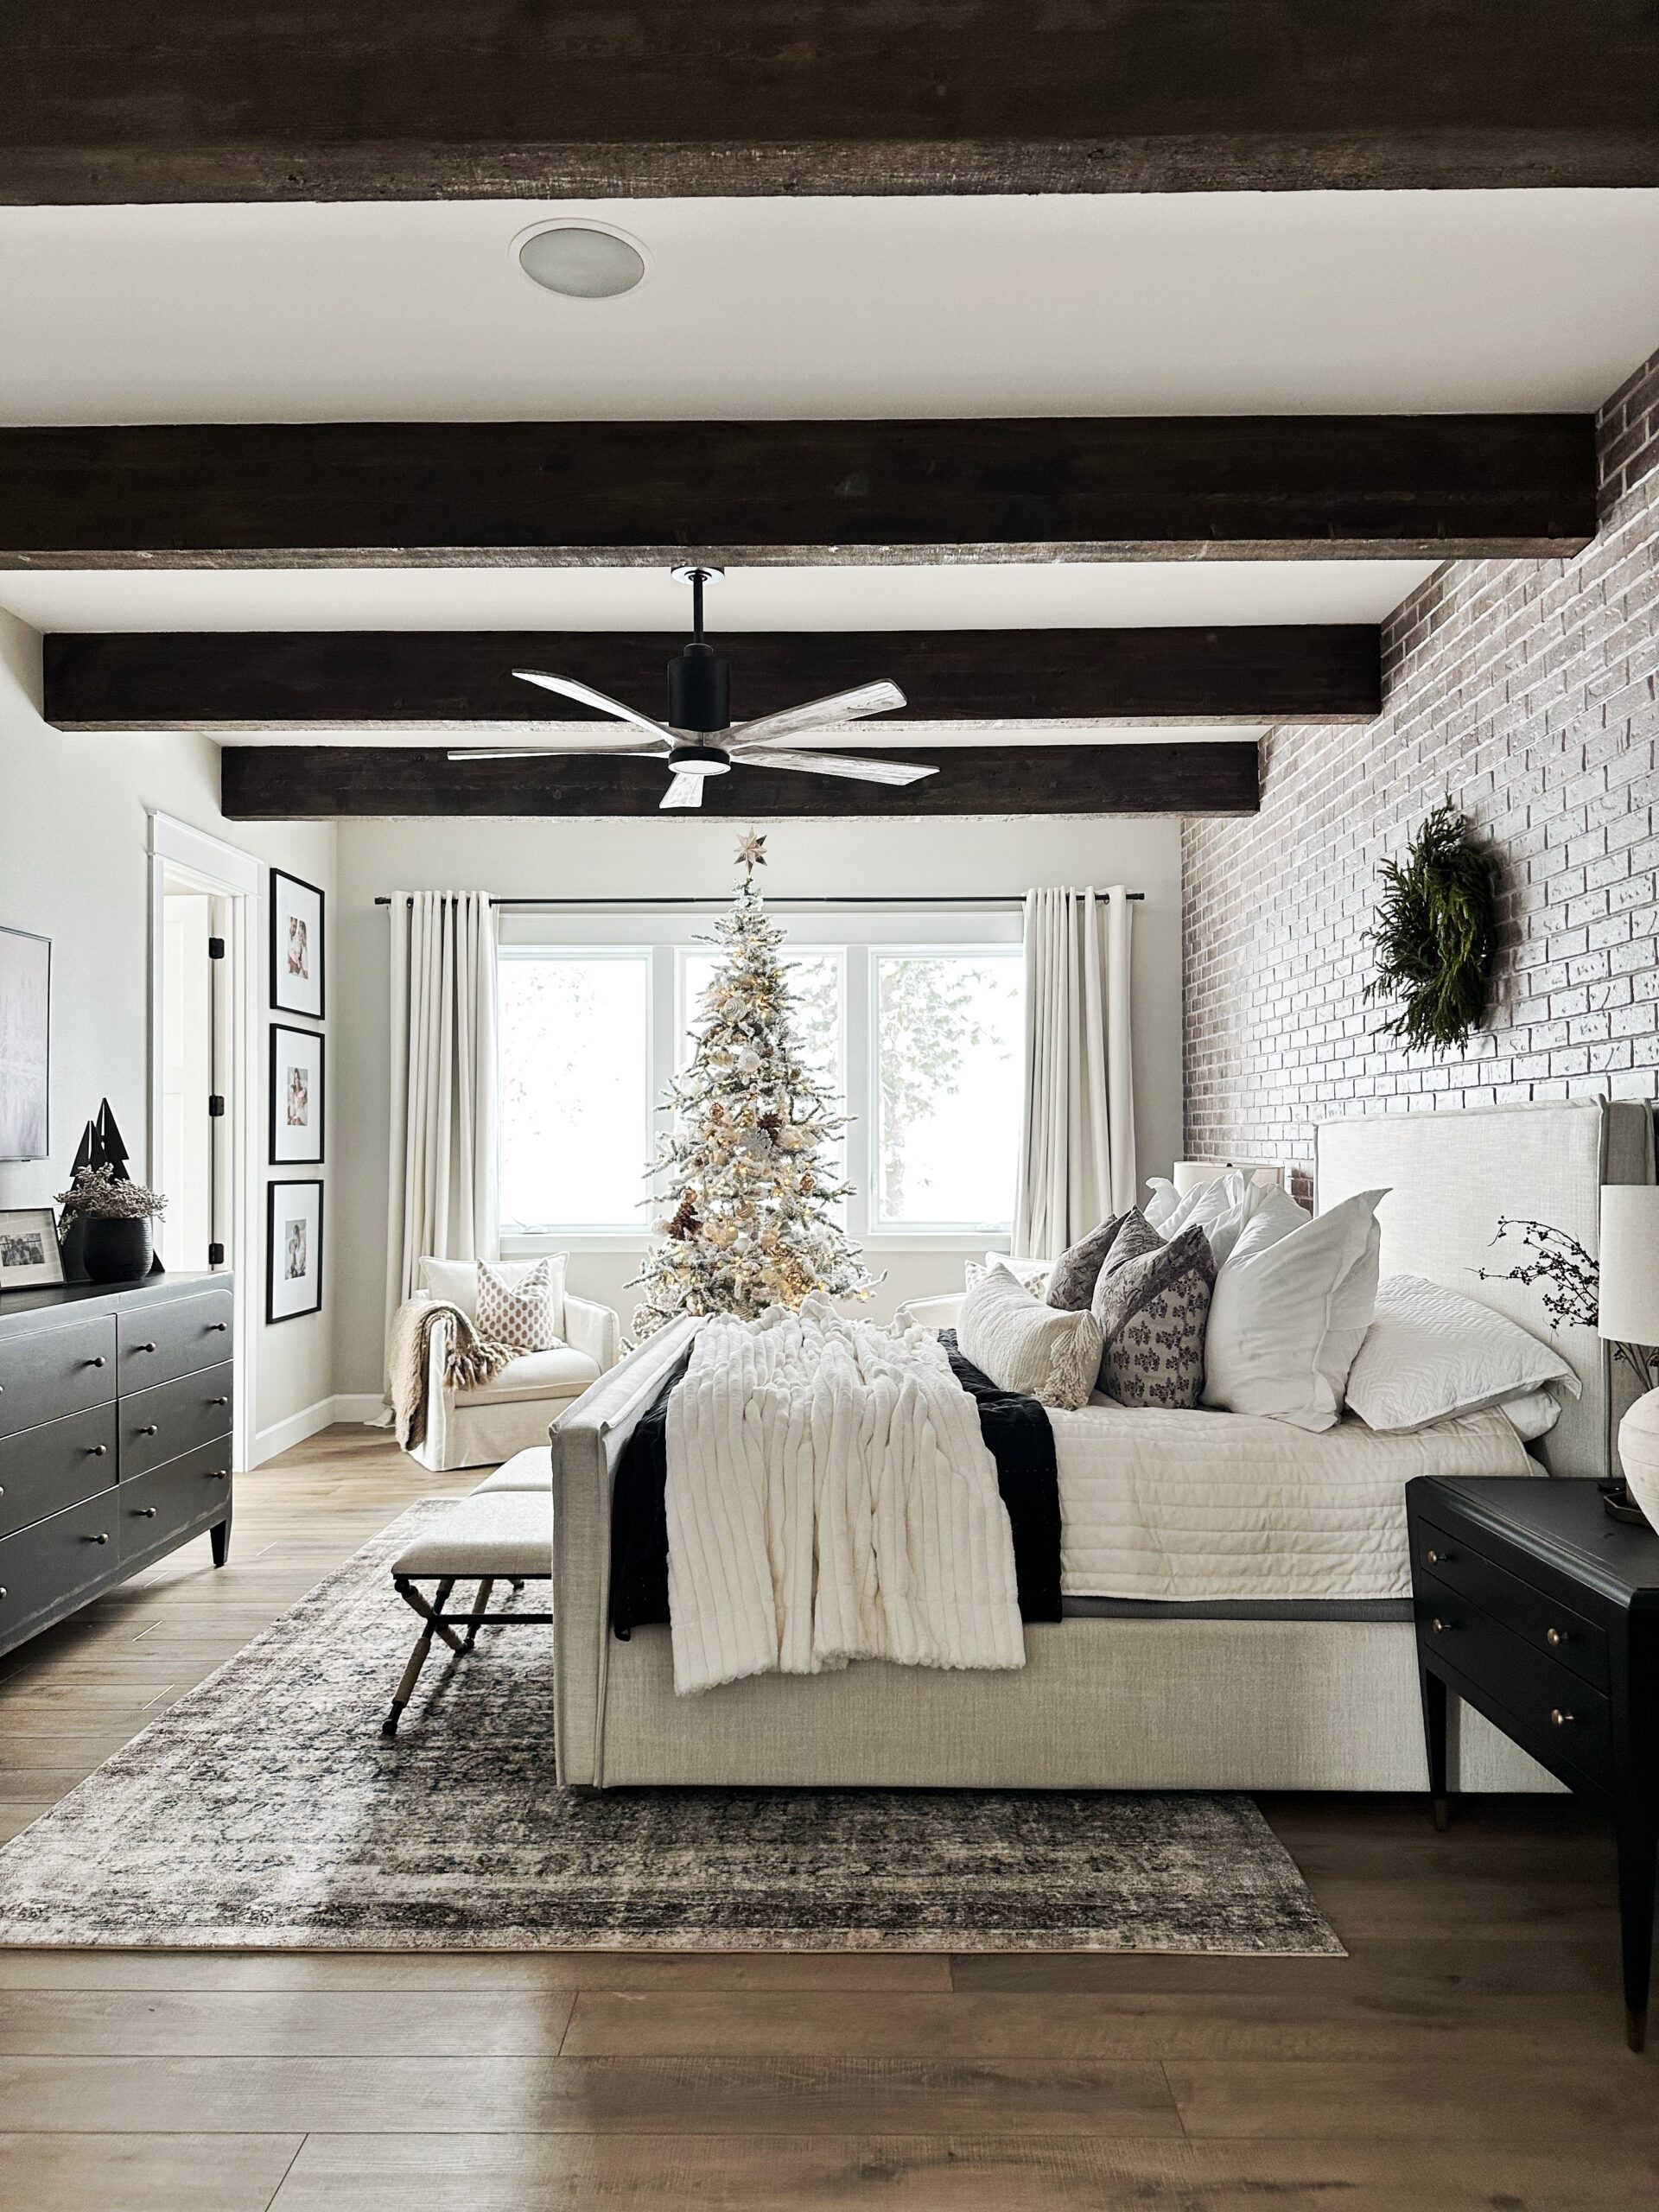 bedroom, holiday home tour, bedroom decor, holiday bedroom decor and style 